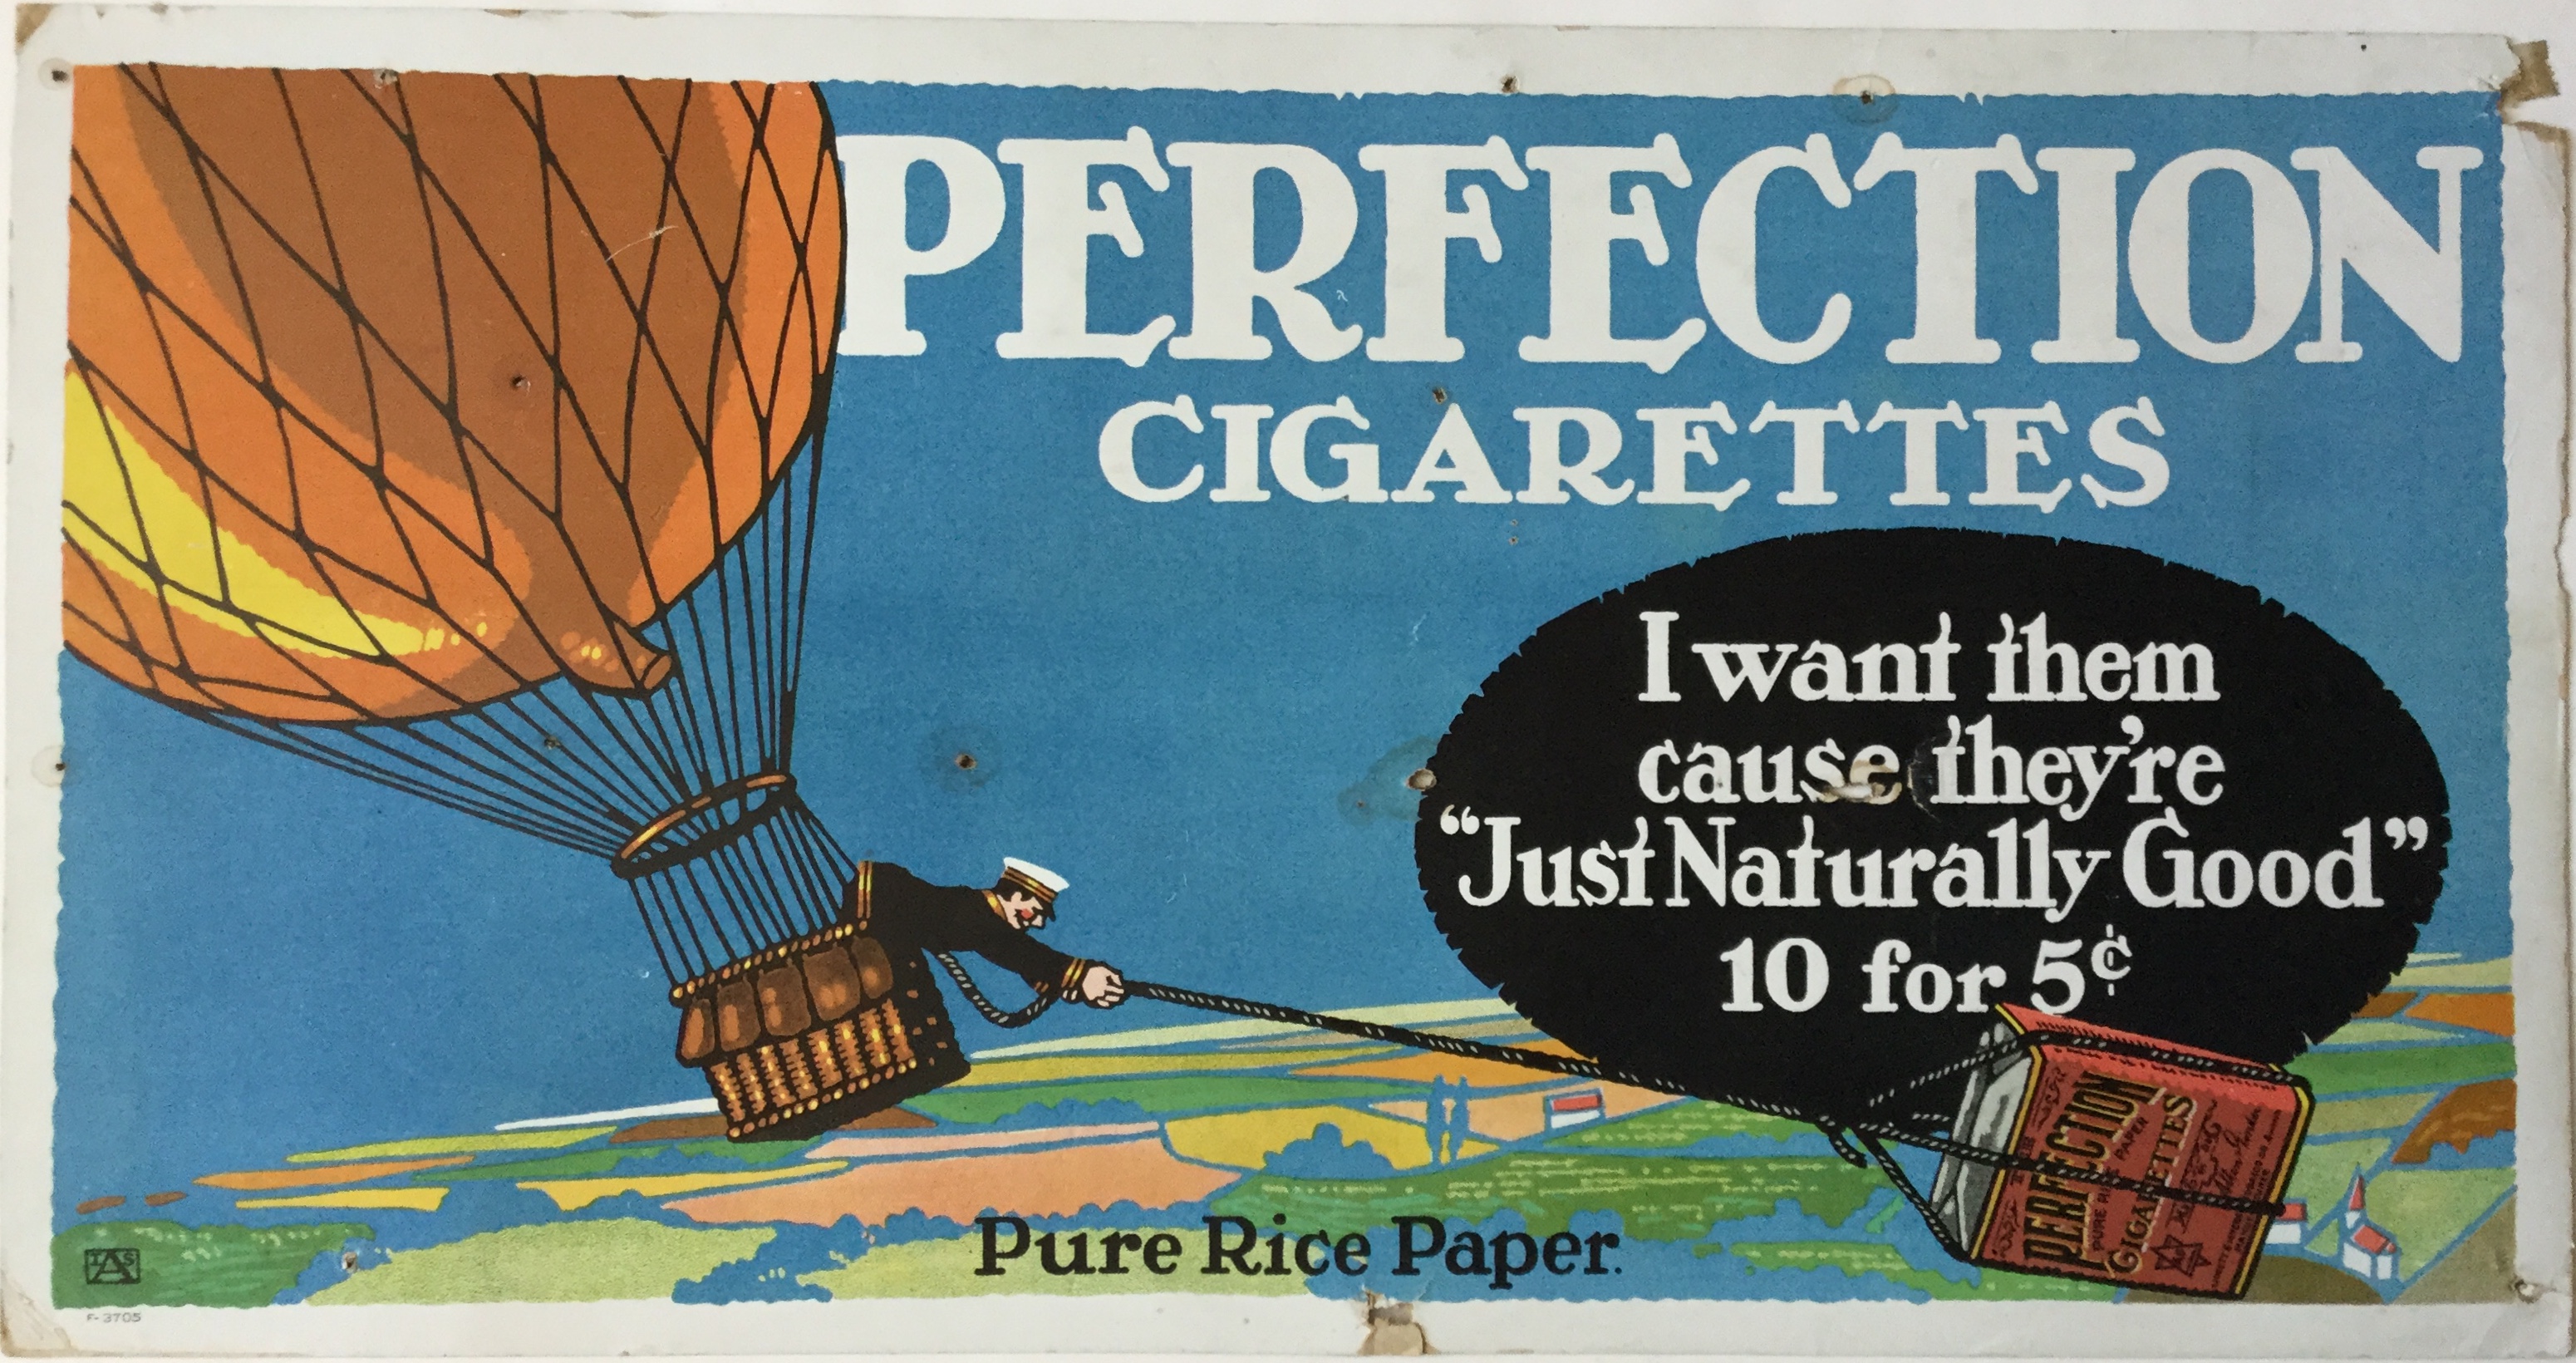 J396	PERFECTION CIGARETTES - I WANT THEM ‘CAUSE THEY’RE JUST NATURALLY GOOD - 10 FOR 5 CENTS